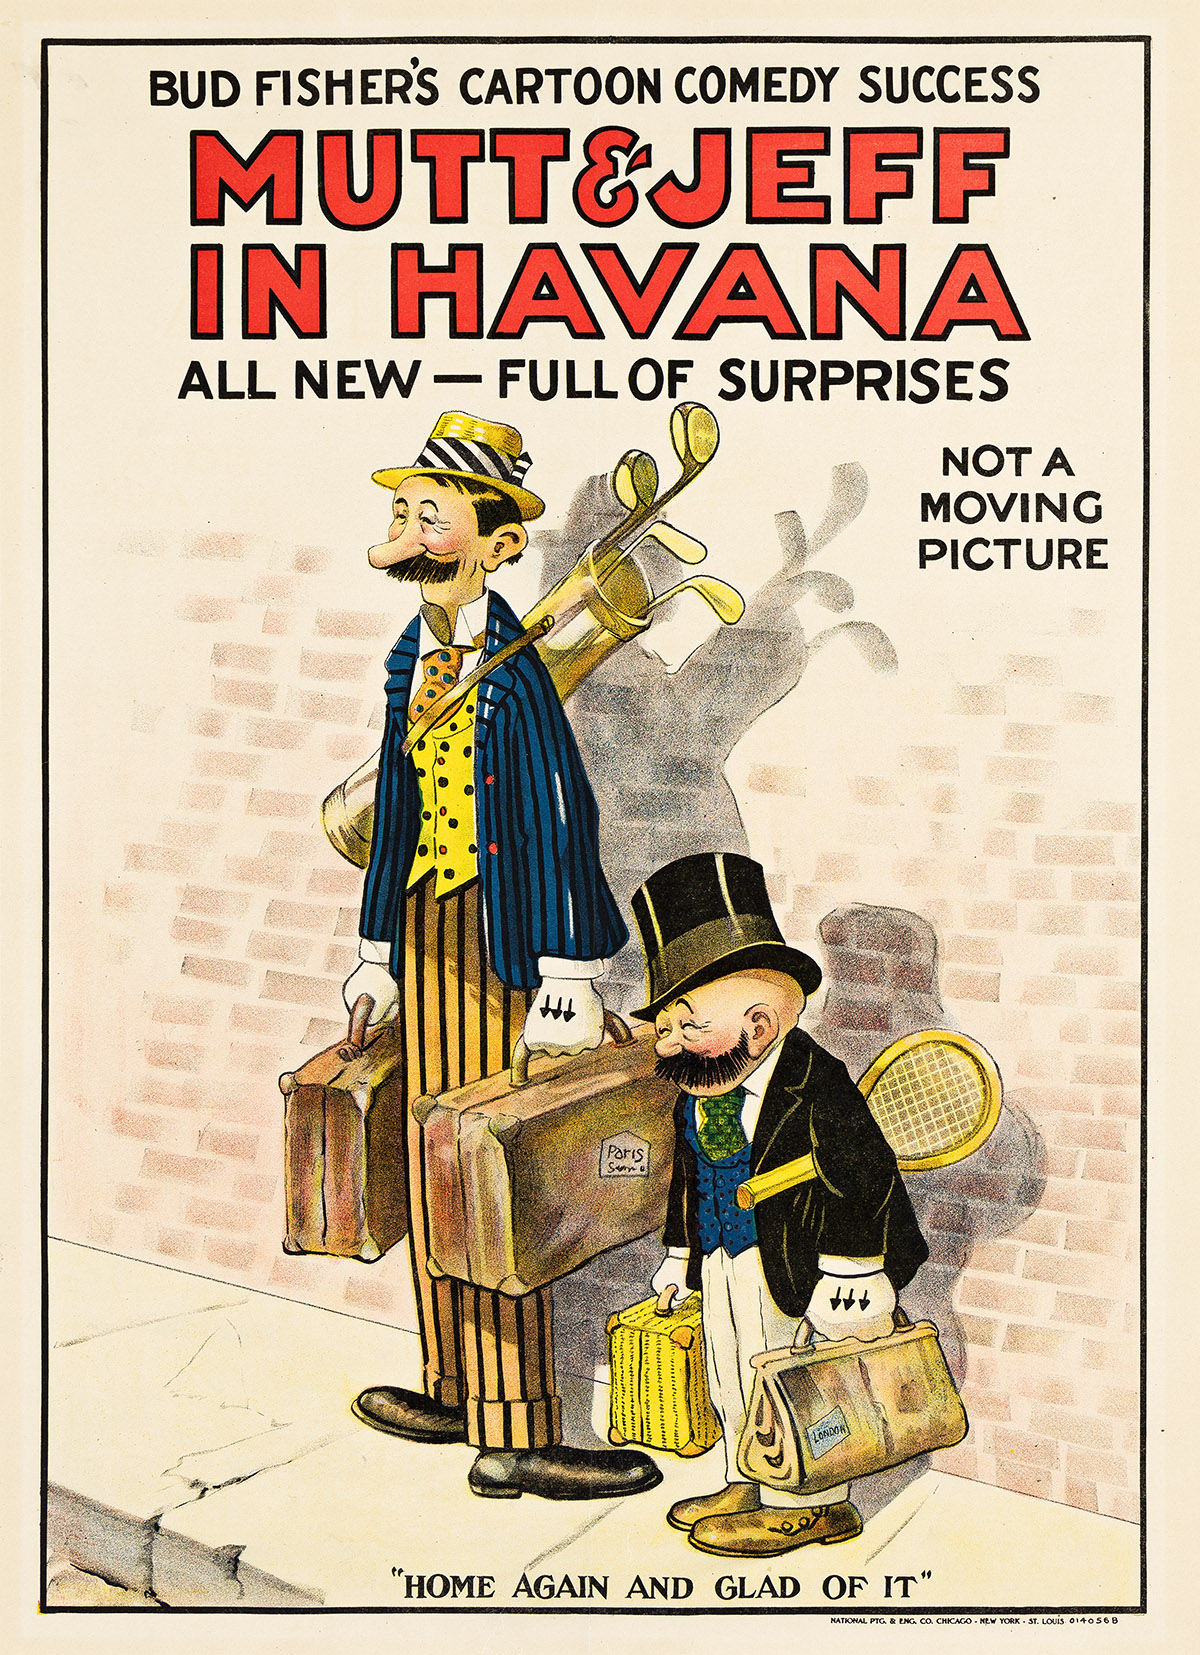 DESIGNER UNKNOWN. MUTT & JEFF IN HAVANA / HOME AGAIN AND GLAD OF IT. Circa 1910s. 27¾x20 inches, 70½x50¾ cm. National Ptg. & Eng. Co.